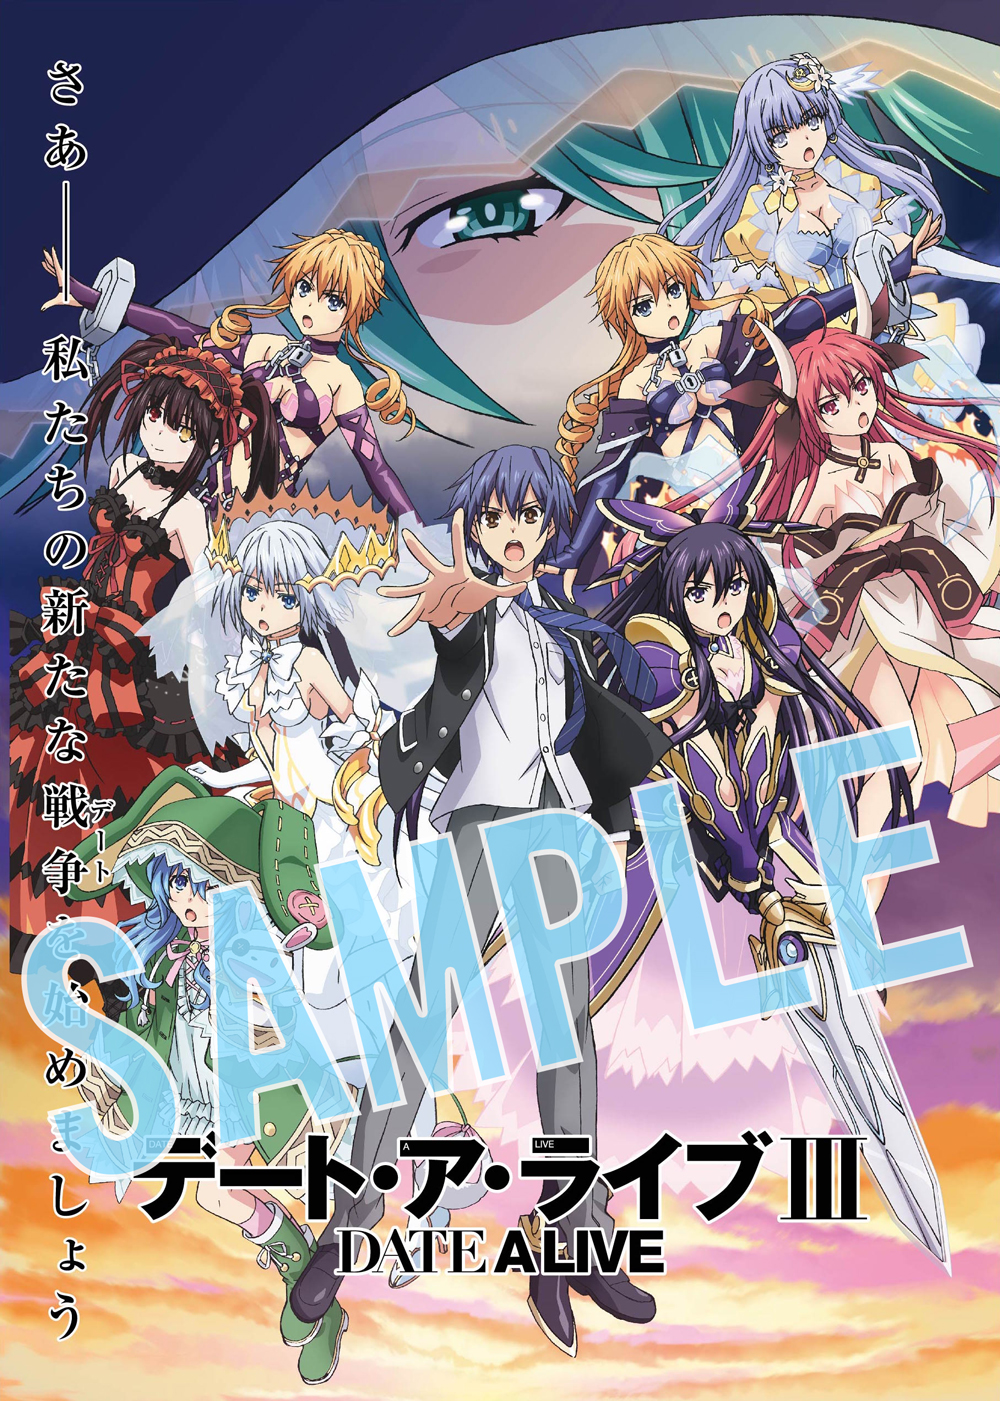 Tvアニメ デート ア ライブ Date A Live にて Blu Ray Dvd